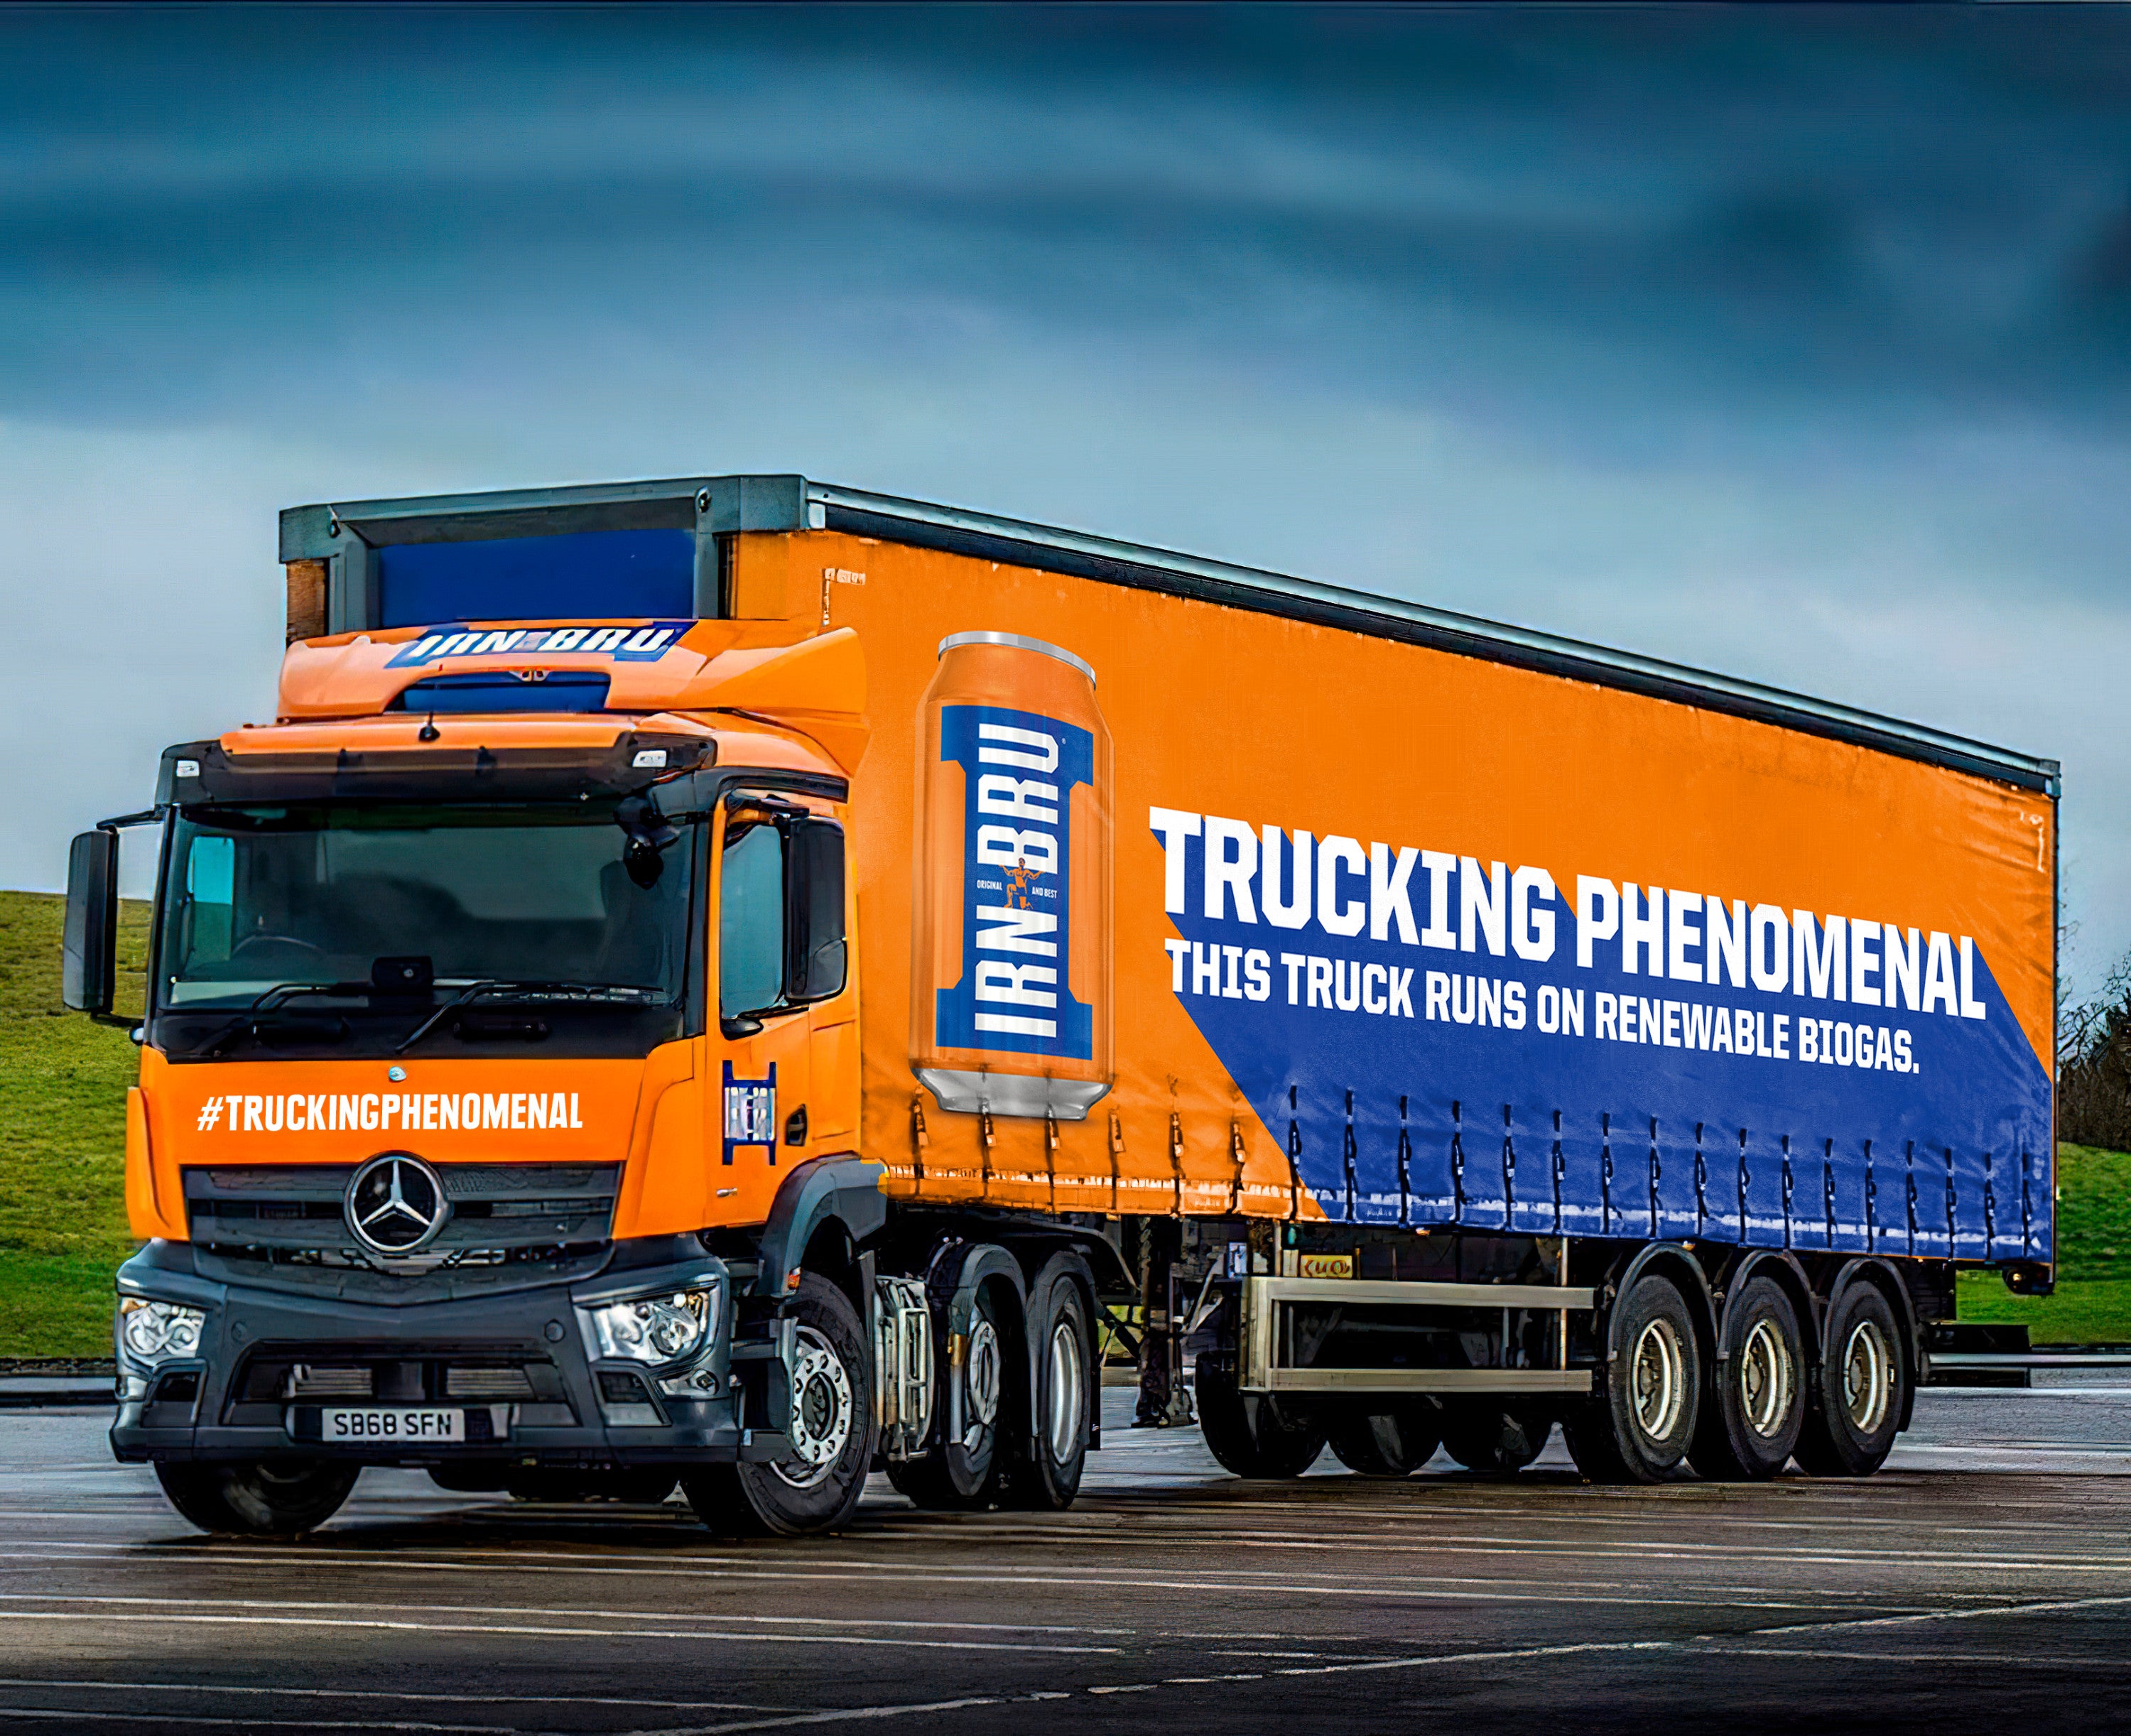 IRN-BRU truck with the words "Trucking phenomenal" on the side